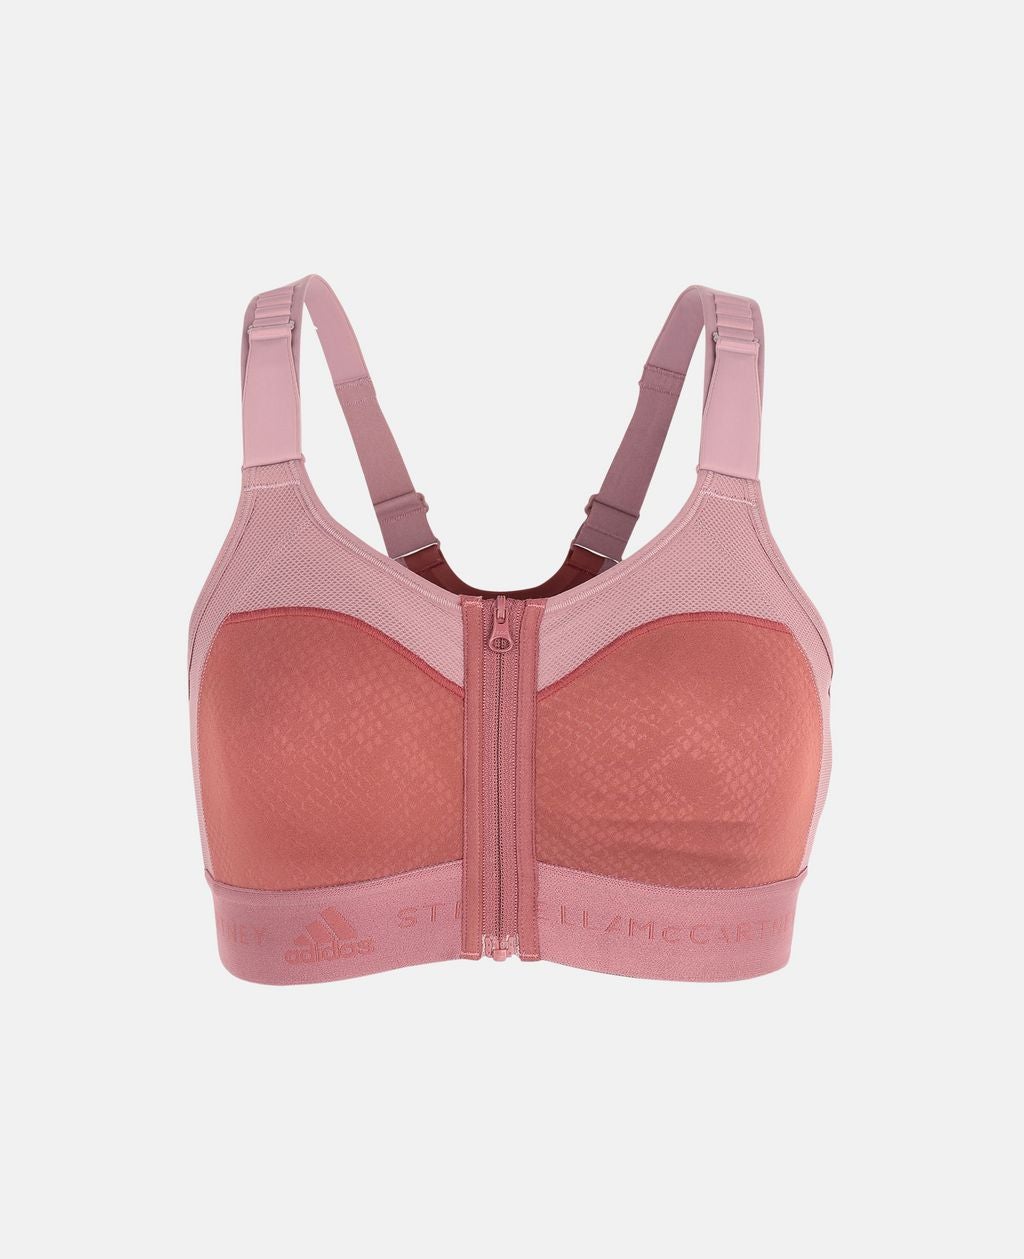 Canfem: An innovative new bra that promises comfort for breast cancer  fighters